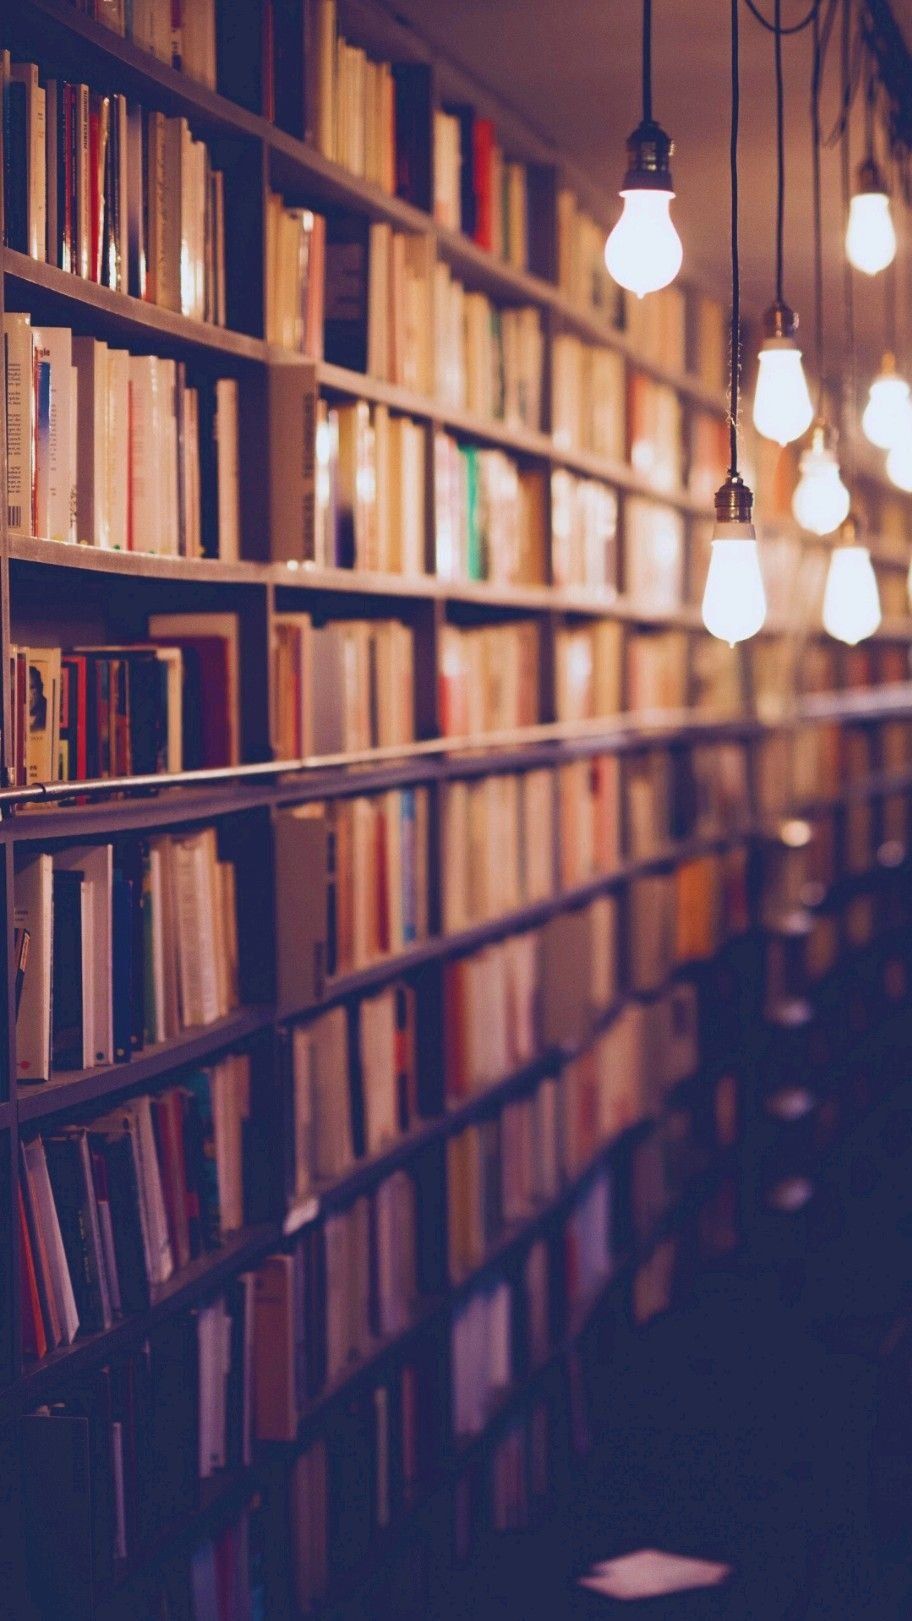 Aesthetic library Wallpaper Download